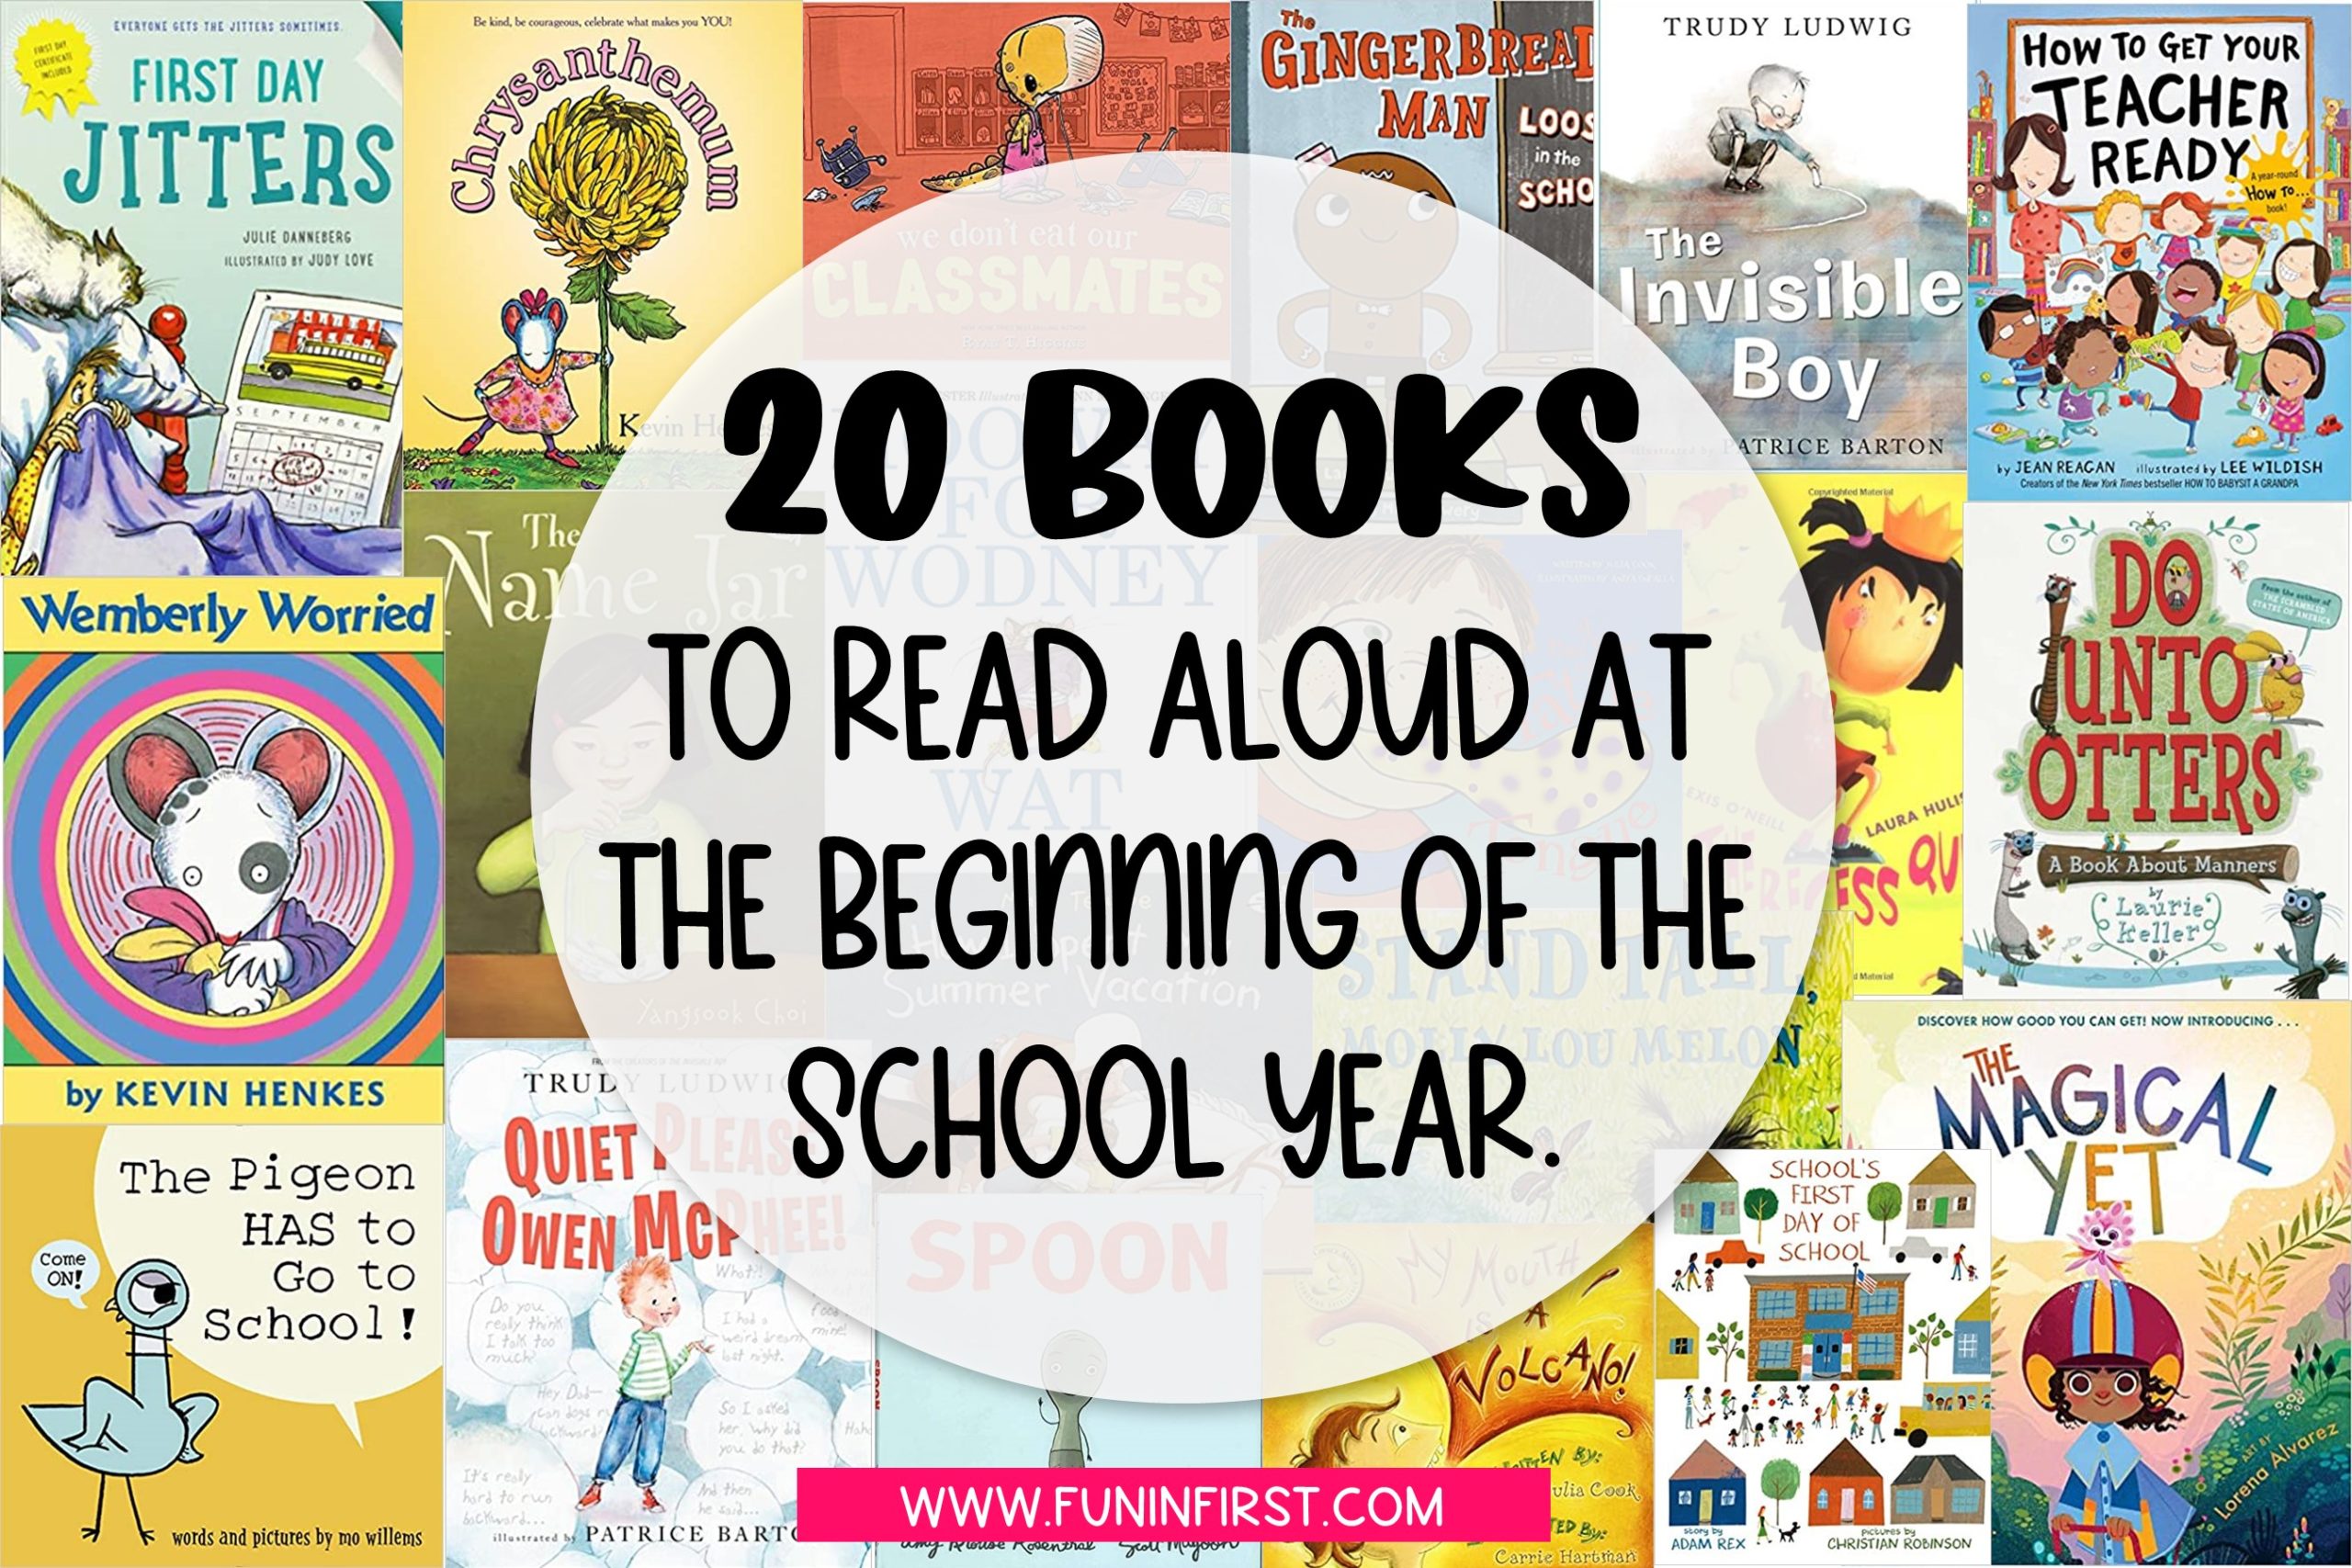 20 Books to Read Aloud at the Beginning of the School Year